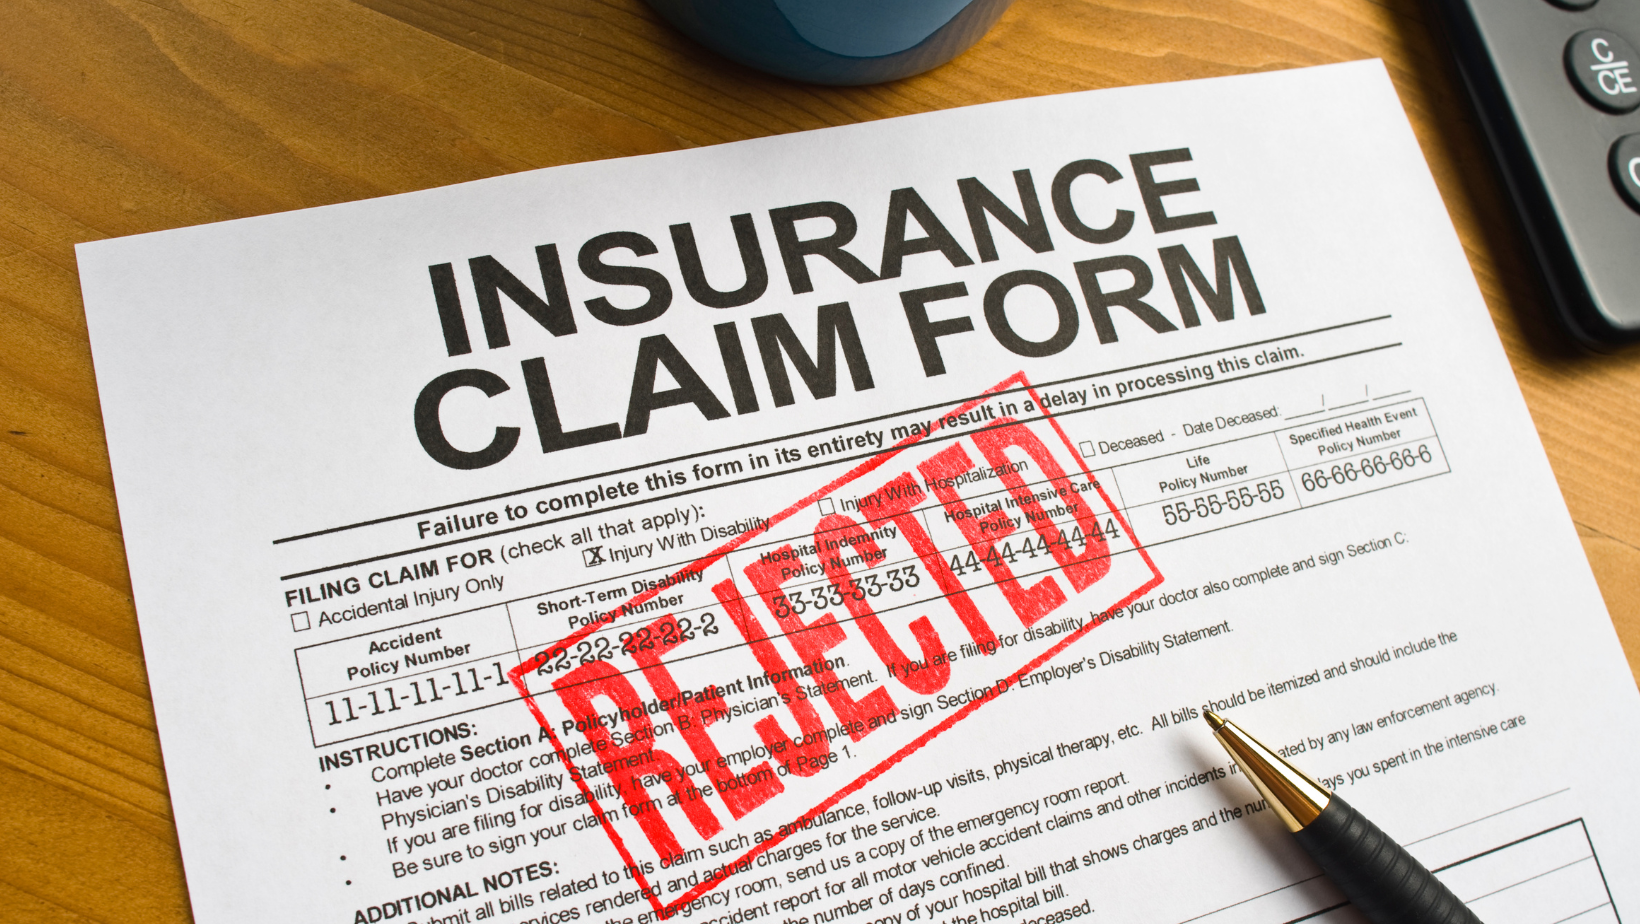 What to avoid as you choose your insurance policies